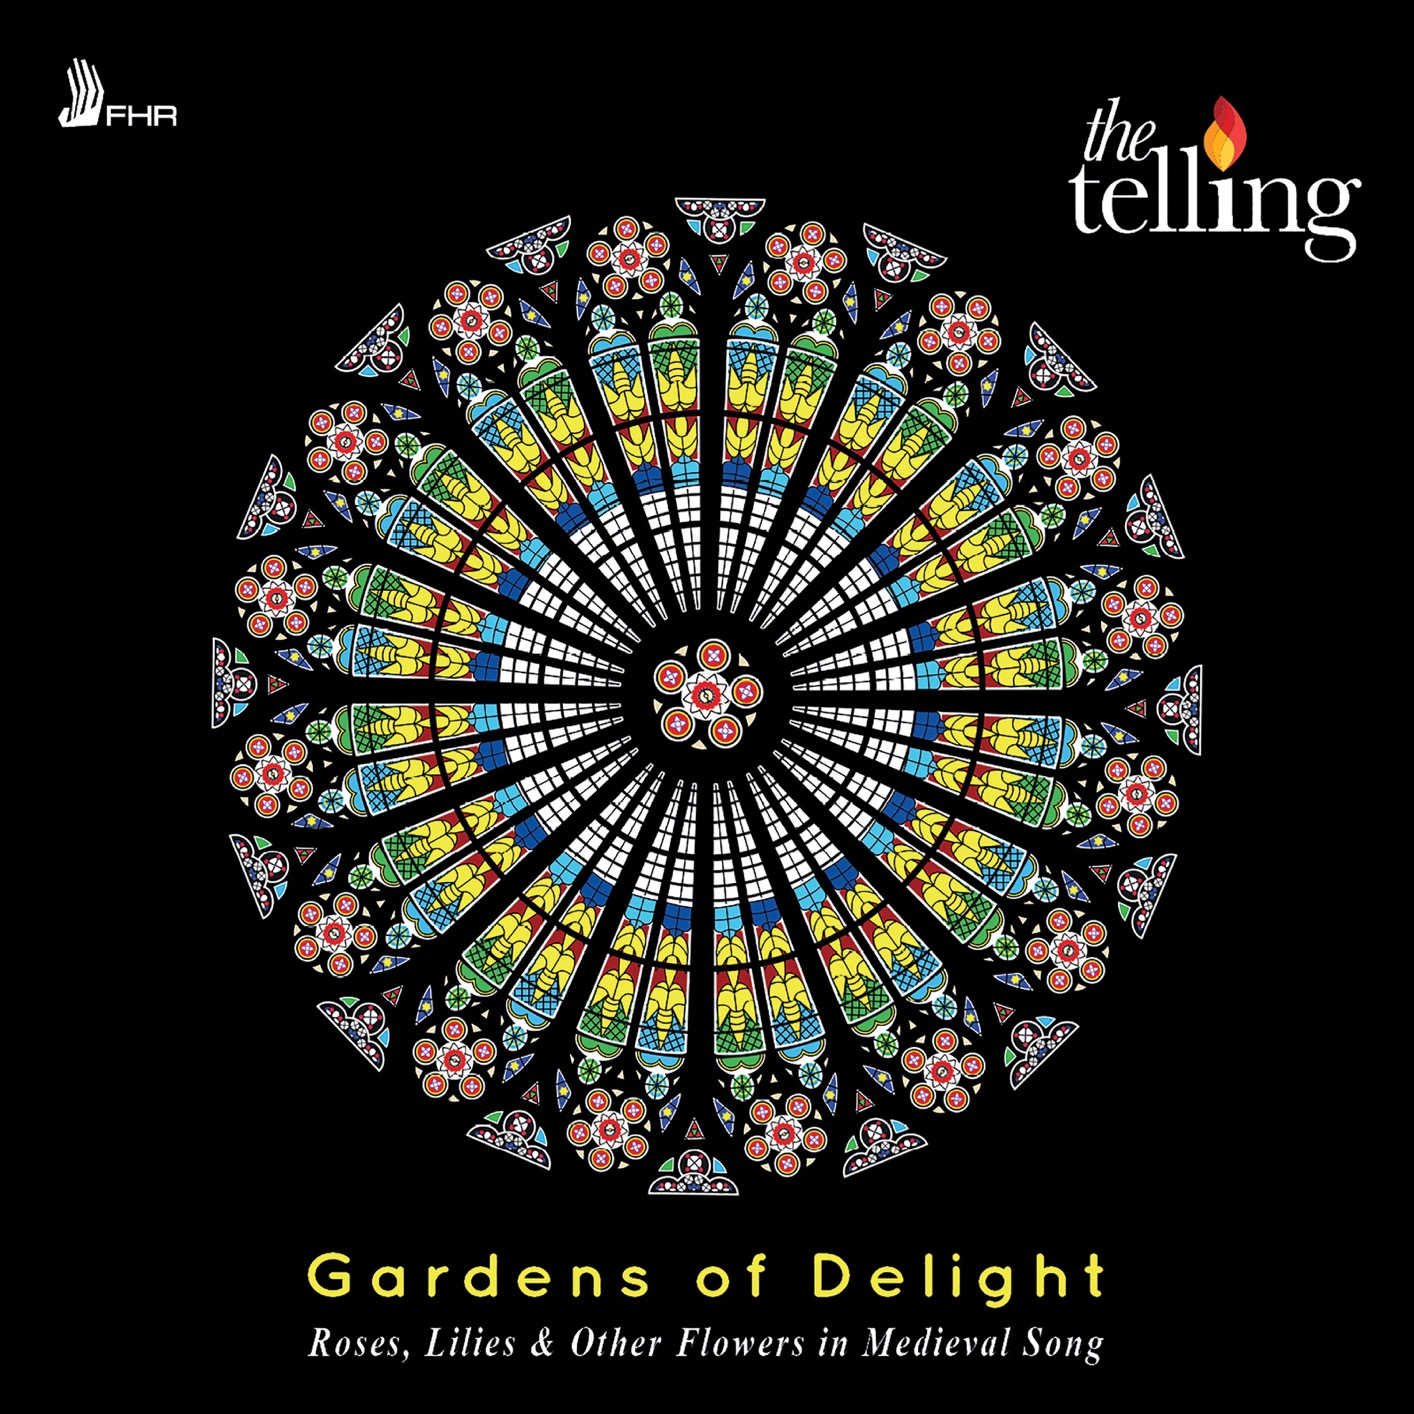 The Telling – Gardens of Delight: Roses, Lilies & Other Flowers in Medieval Song (2019) [FLAC 24bit/96kHz]